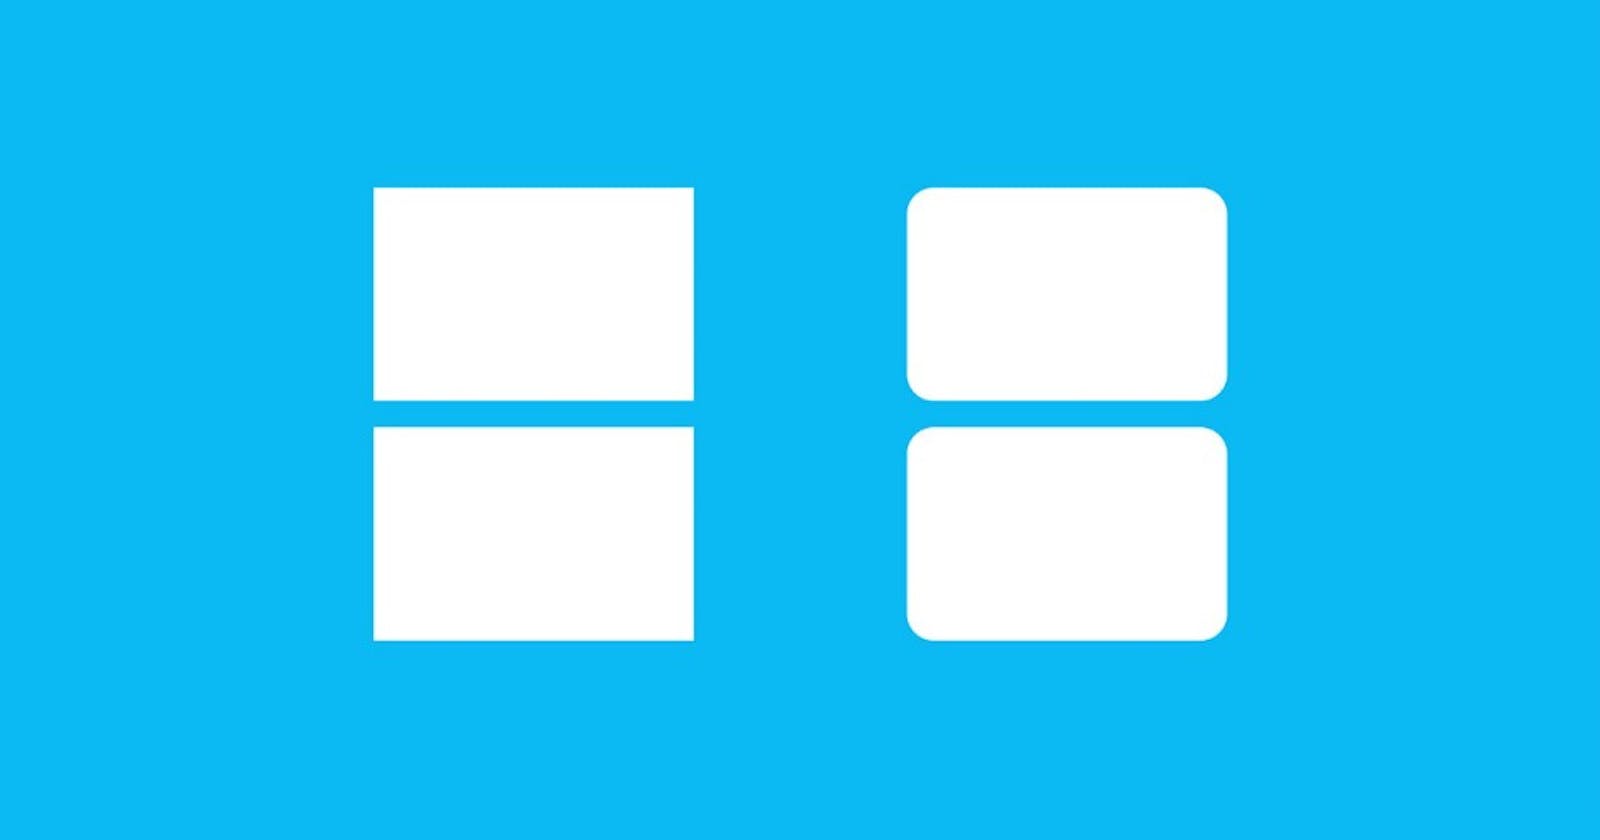 Rounded corners, hierarchical grids, assistive tech, UX vision statements